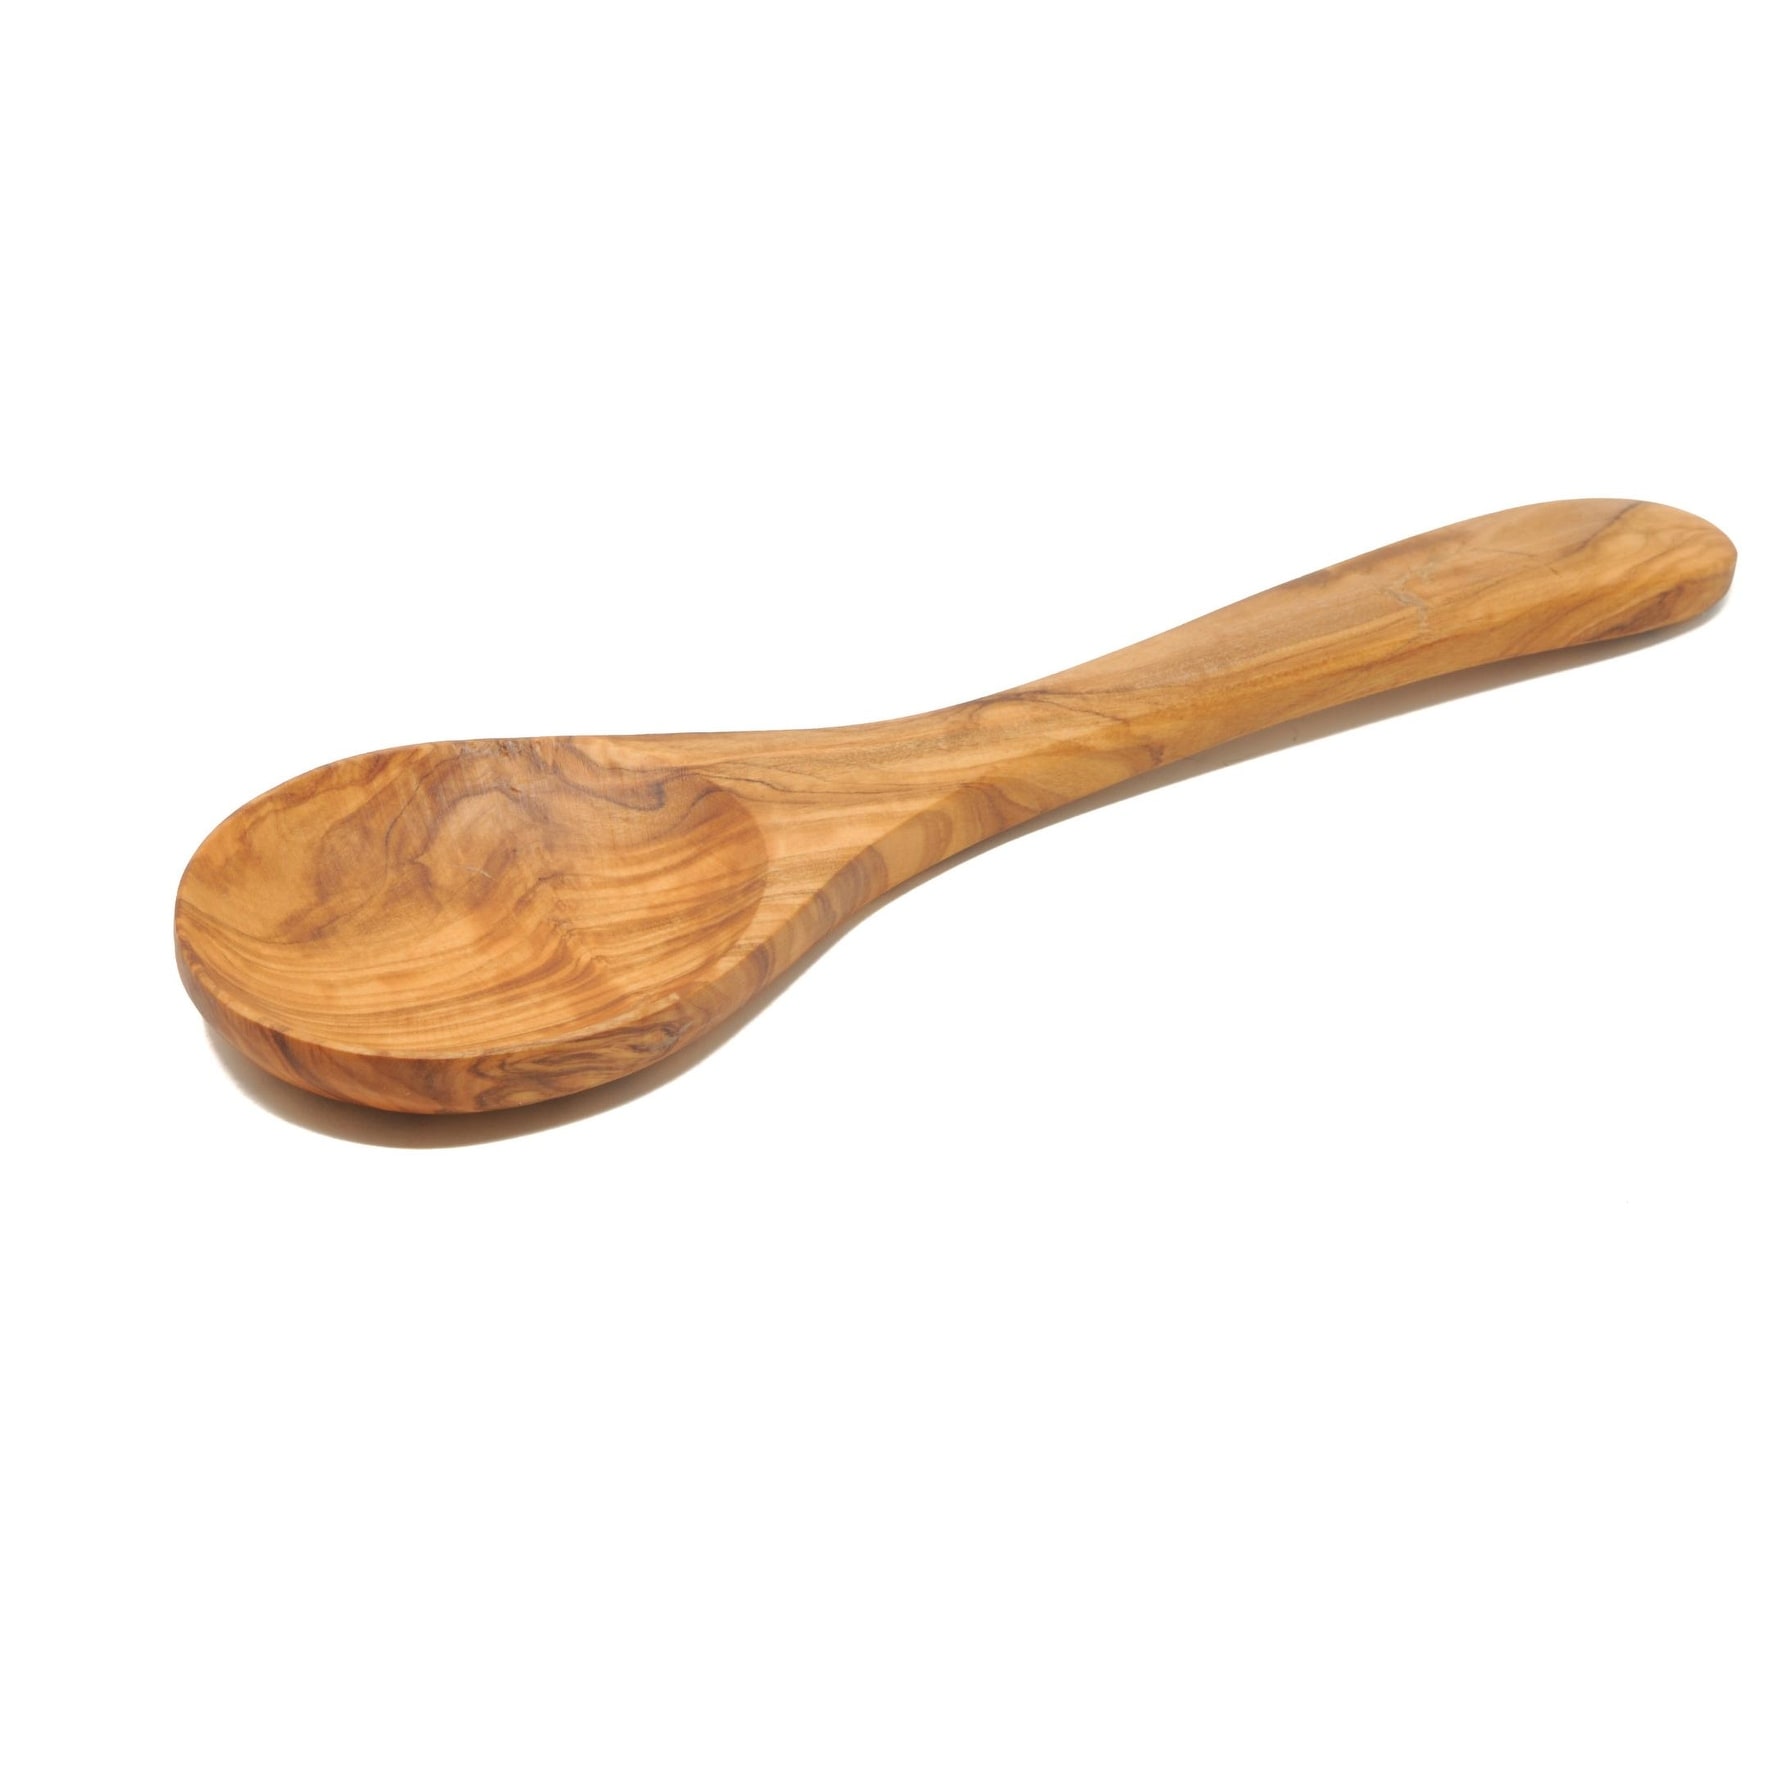 https://ak1.ostkcdn.com/images/products/is/images/direct/6ce9b987e90a30a01ad7920038928ce6d76663ad/Olive-Wood-Large-Mouth-Serving-Cooking-Spoon.jpg